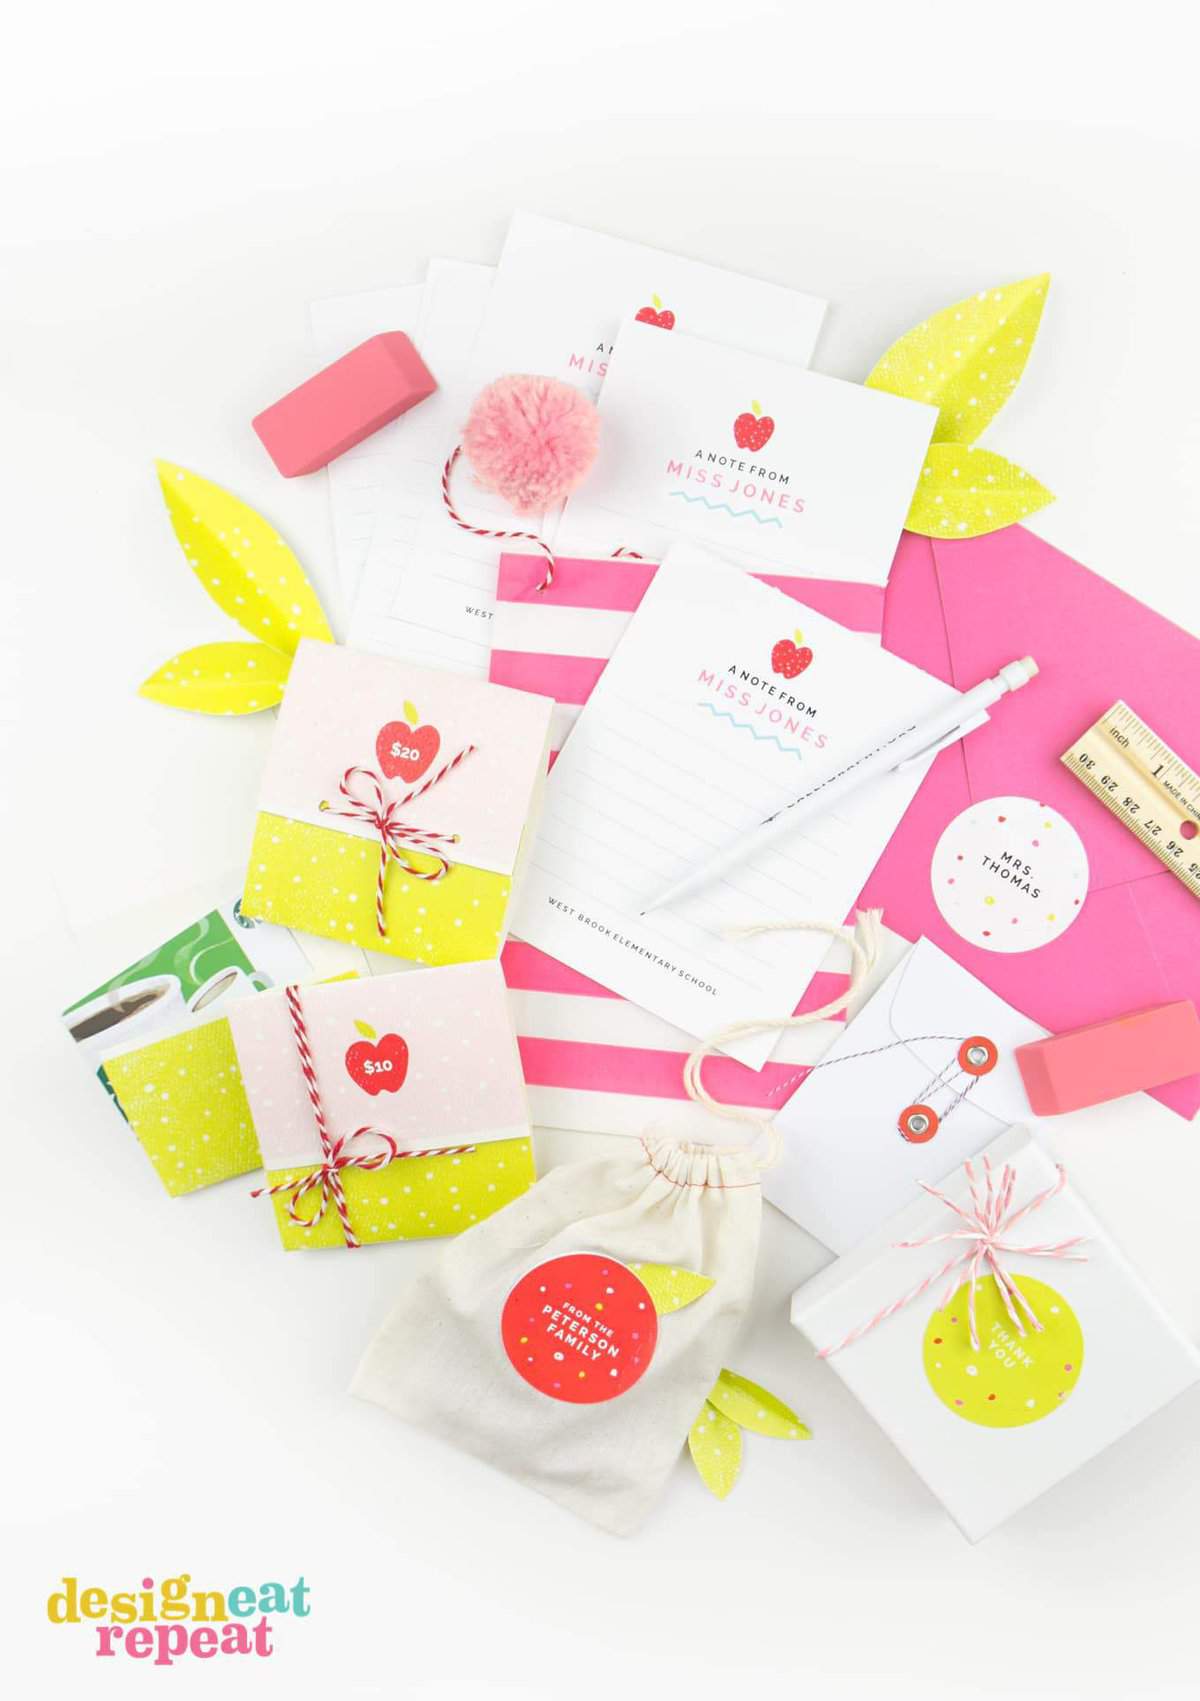 Make adorable teacher gifts with these 3 free printable teacher gift ideas from #Avery and Design Eat Repeat! Not only great for back to school season, but versatile designs to keep on hand for teacher appreciation gifts, thank you gifts, or end of the year gifts! #teachergift #printables #averyproducts